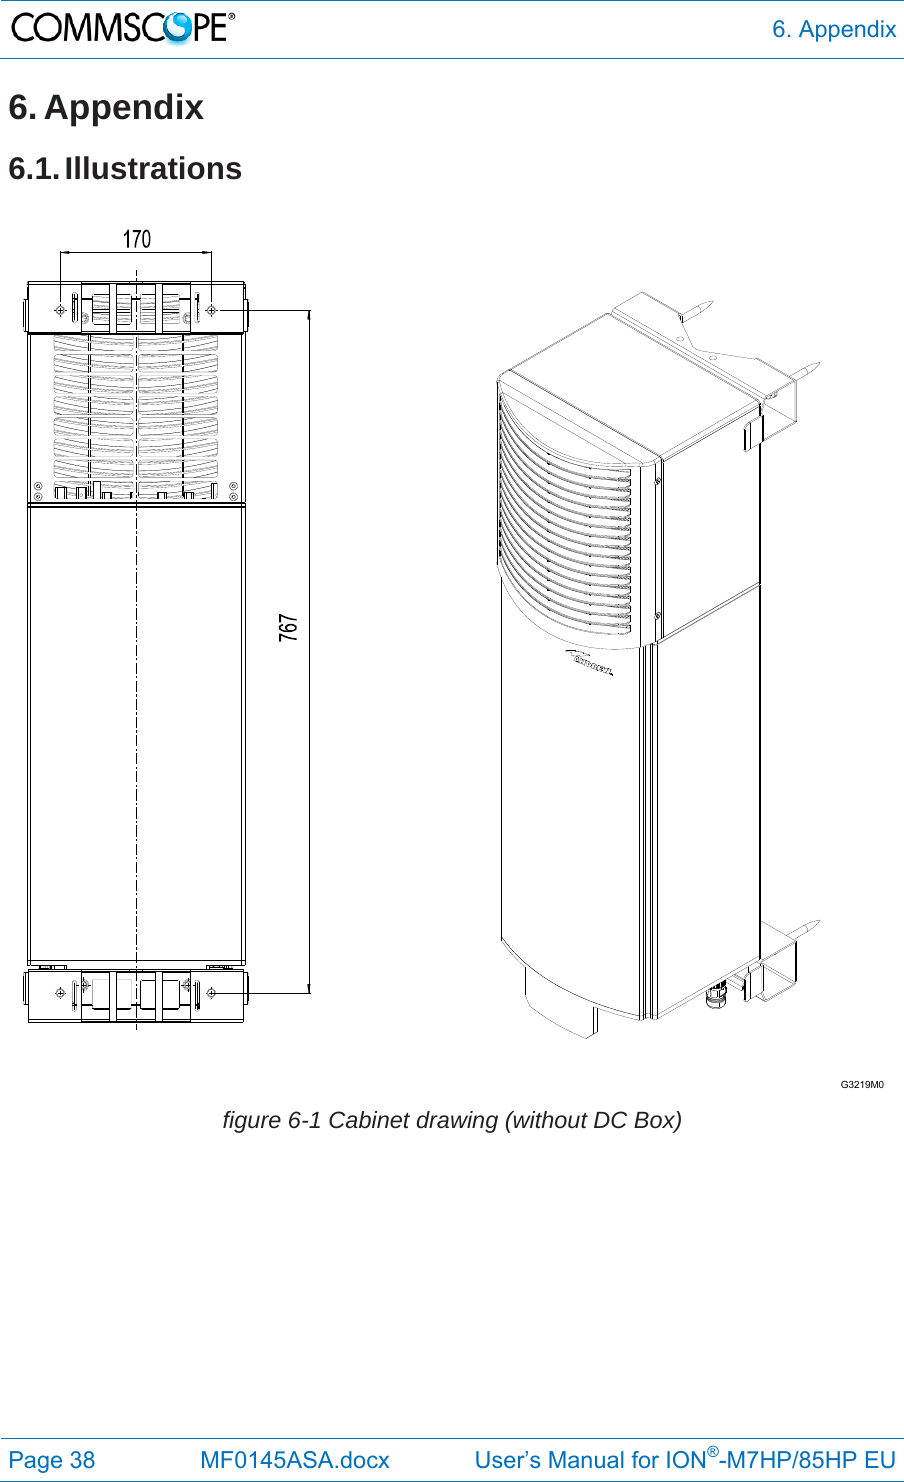  6. Appendix Page 38  MF0145ASA.docx             User’s Manual for ION®-M7HP/85HP EU 6. Appendix 6.1. Illustrations   figure 6-1 Cabinet drawing (without DC Box)   G3219M0